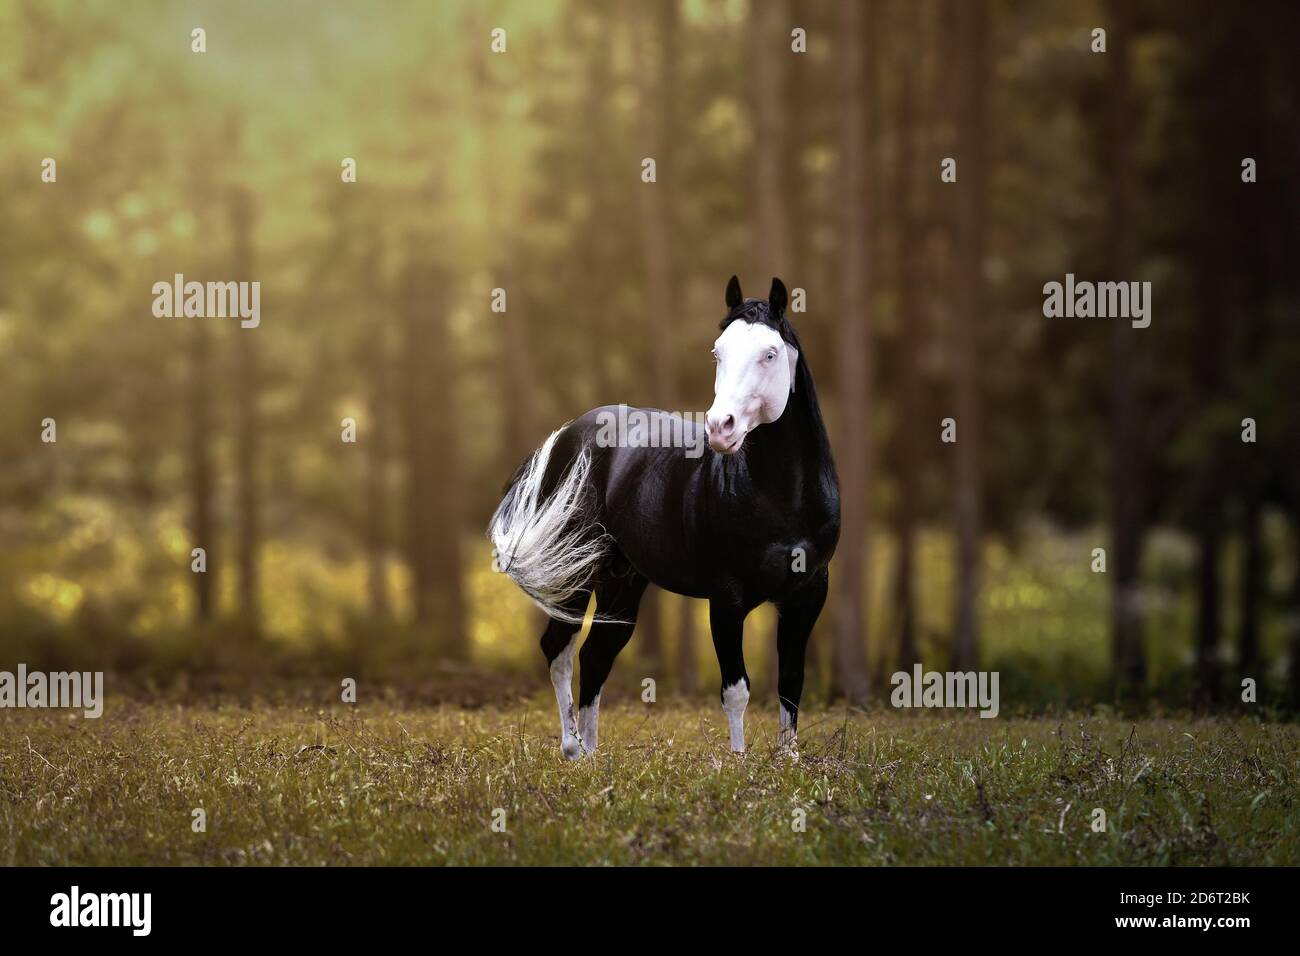 SAO PAULO, BRAZIL - Jul 05, 2020: Beautiful horse in the jungle with white face galloping in freedom. Stock Photo